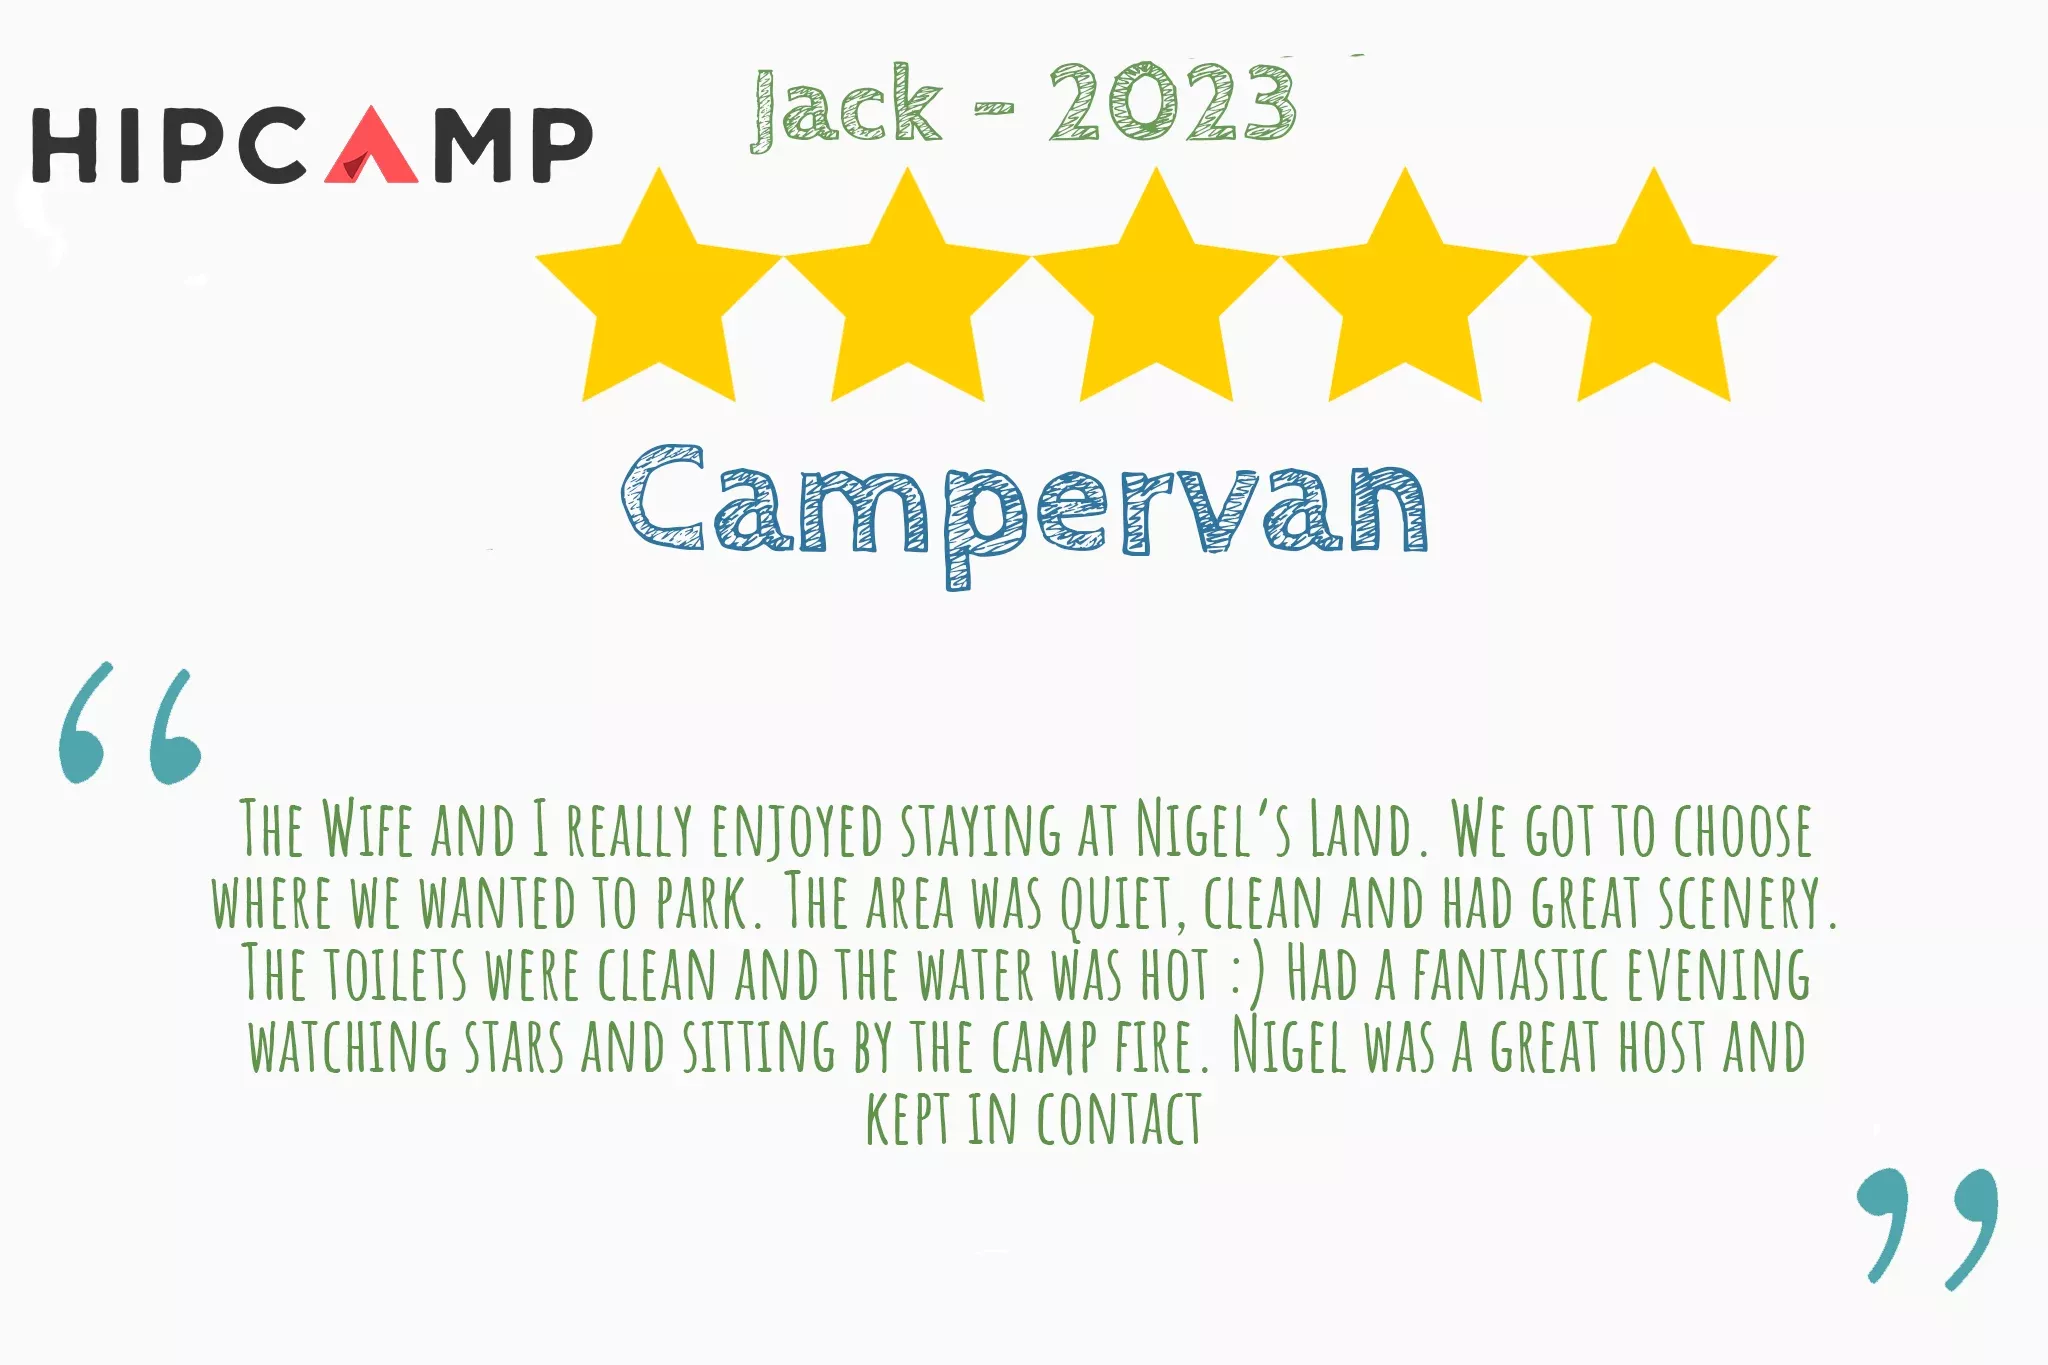 5 star hipcamp review from Jack that says